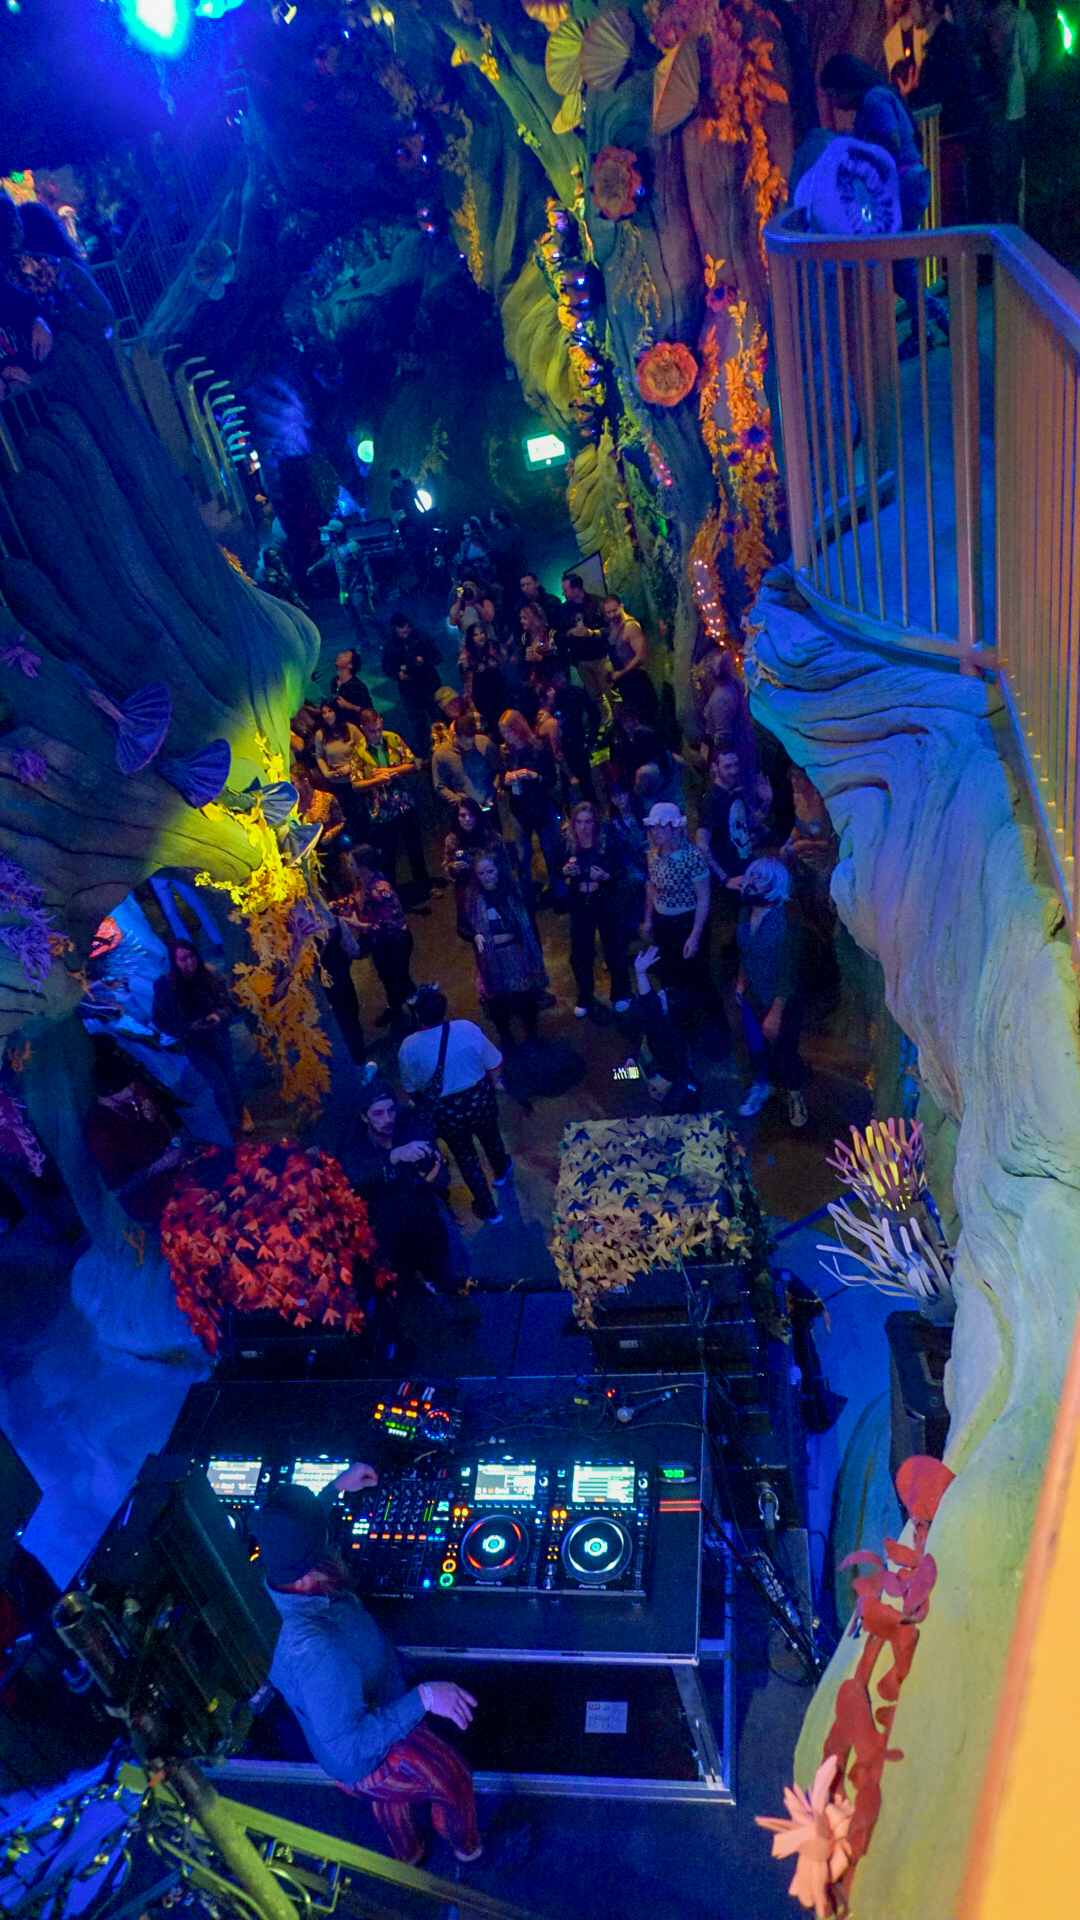 Beats Antique converged on Meow Wolf's Convergence Station last Saturday (Photos: Oliver Thieme)